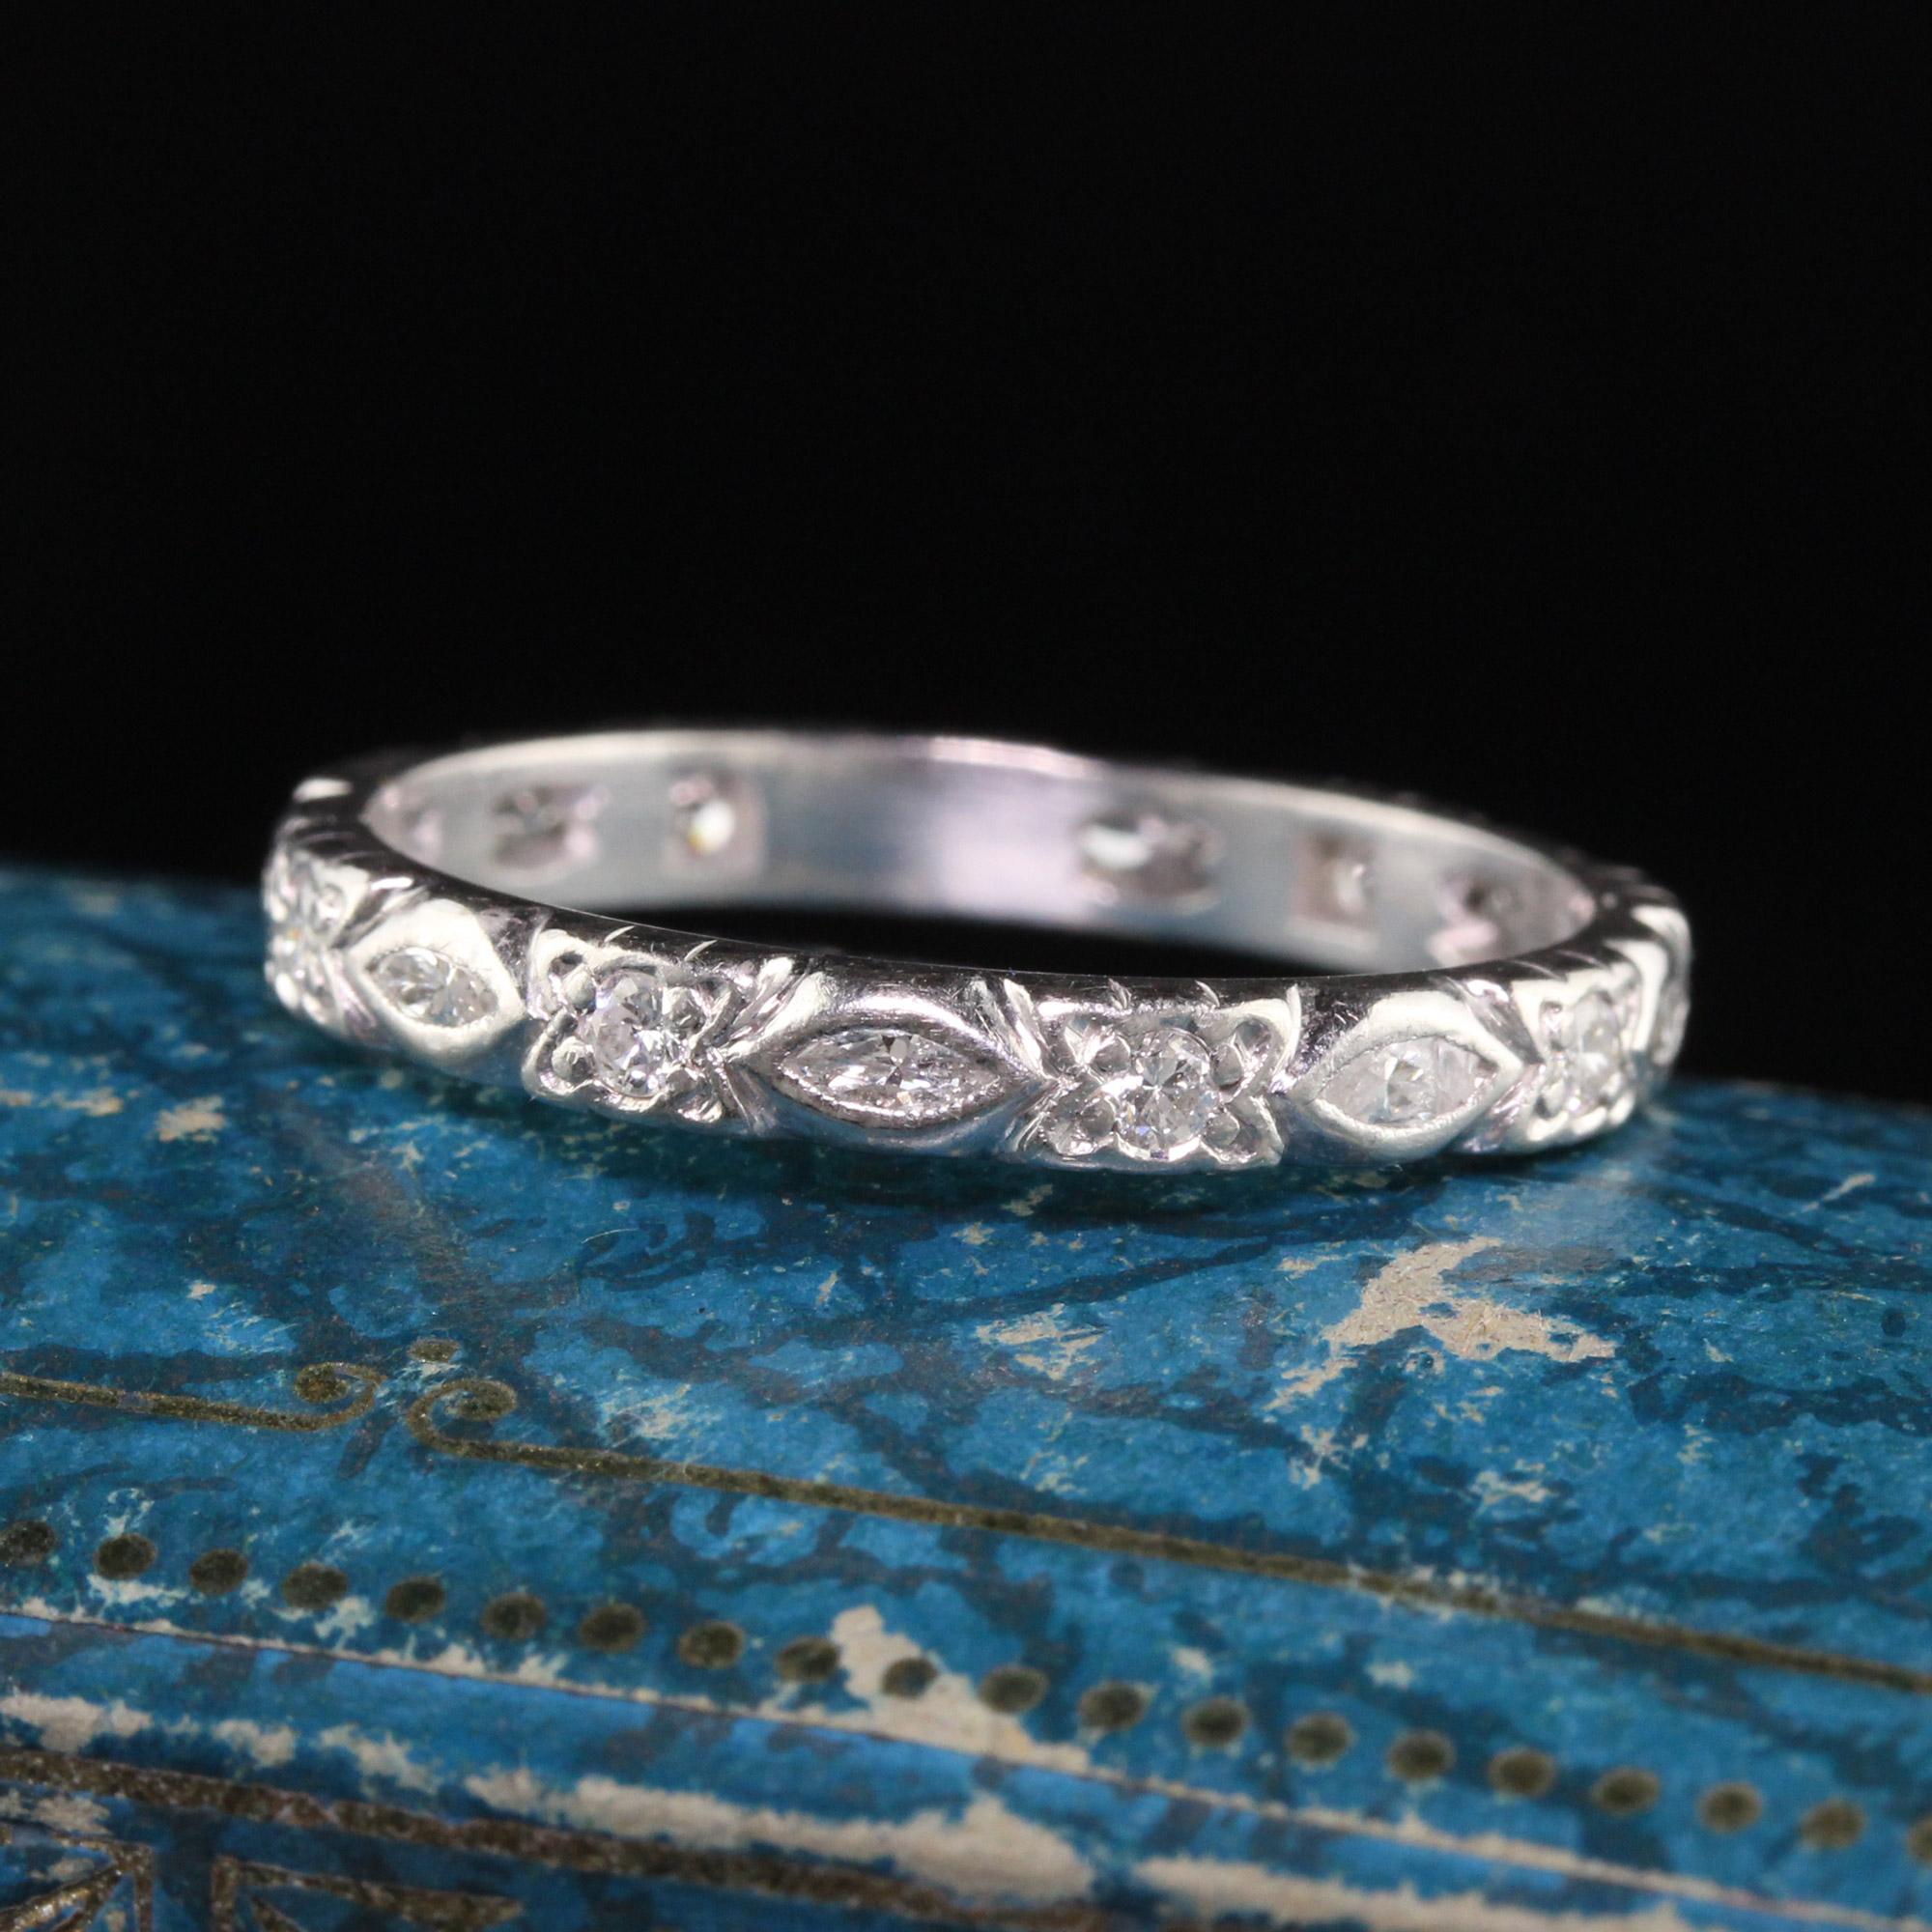 Beautiful Antique Art Deco Platinum Old Euro Marquise Diamond Eternity Band. This incredible band is crafted in platinum. The band has old european cut diamonds and marquise going around the entire ring. It is in great condition.

Item